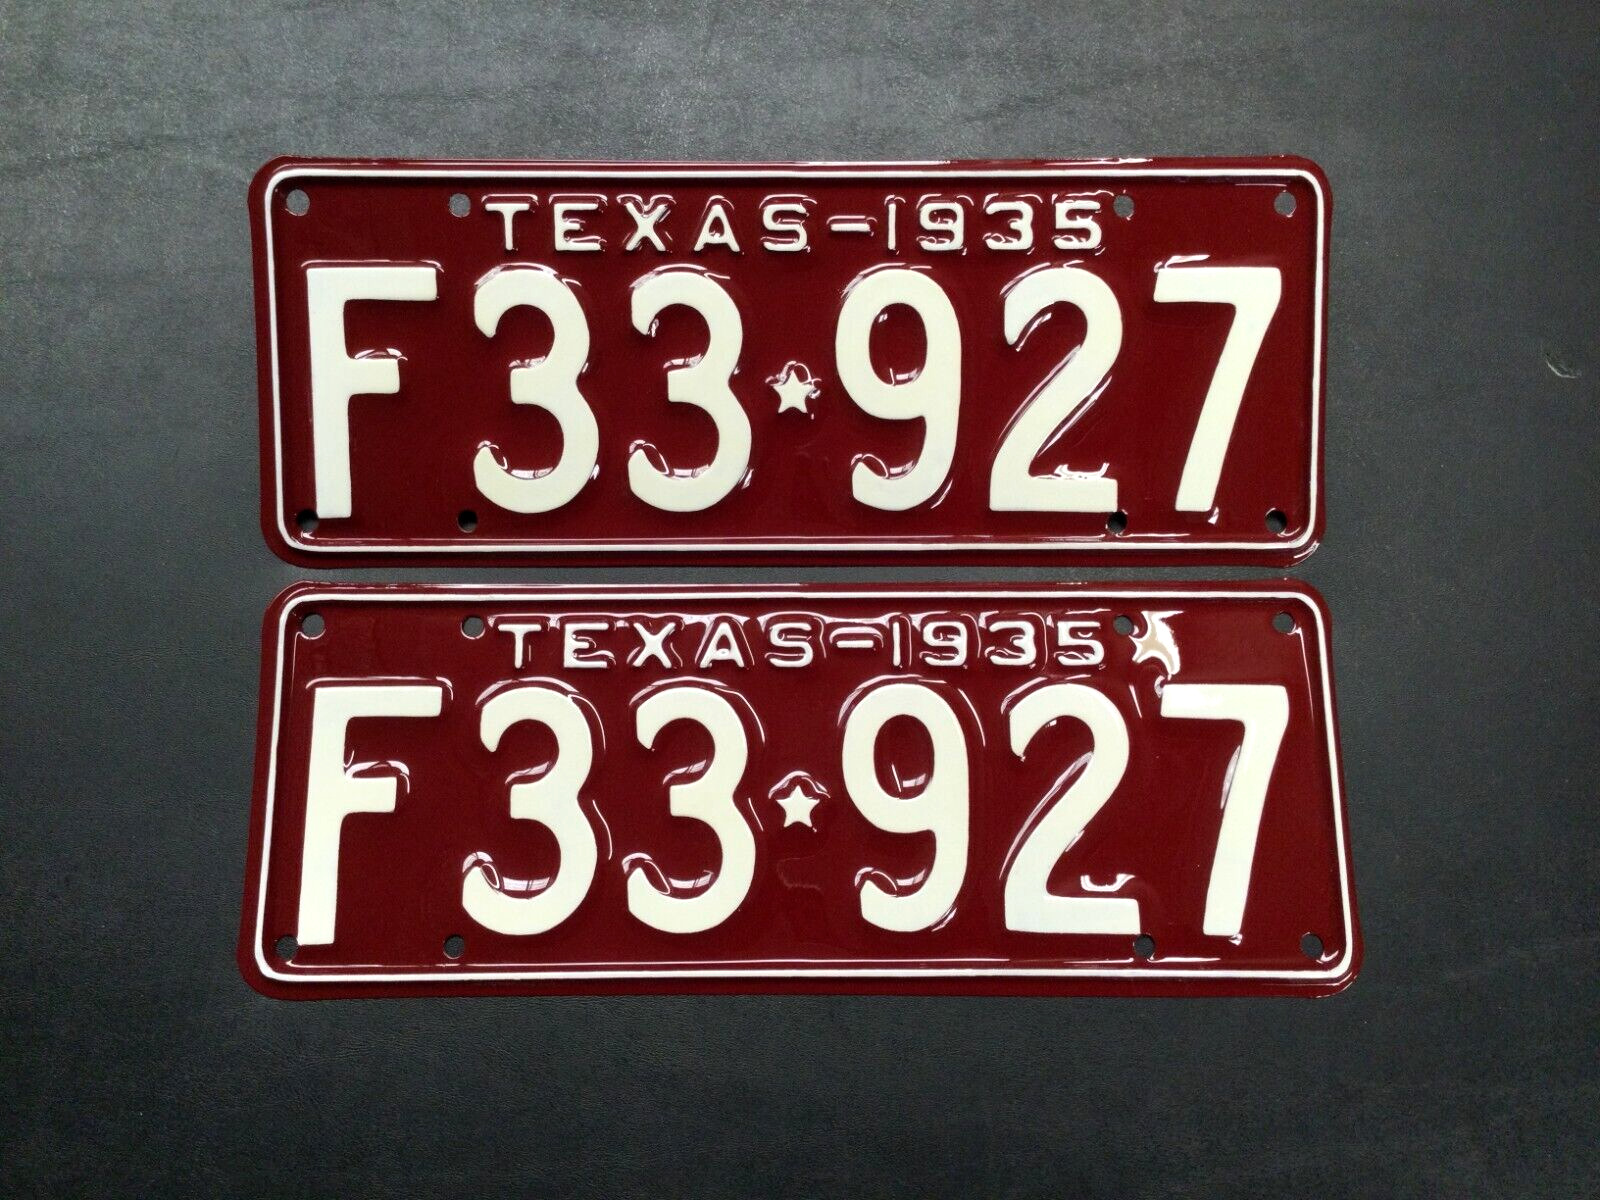 VINTAGE 1935 TEXAS LICENSE PLATE SET VERY NICELY RESTORED HIGH QUALITY F33 927